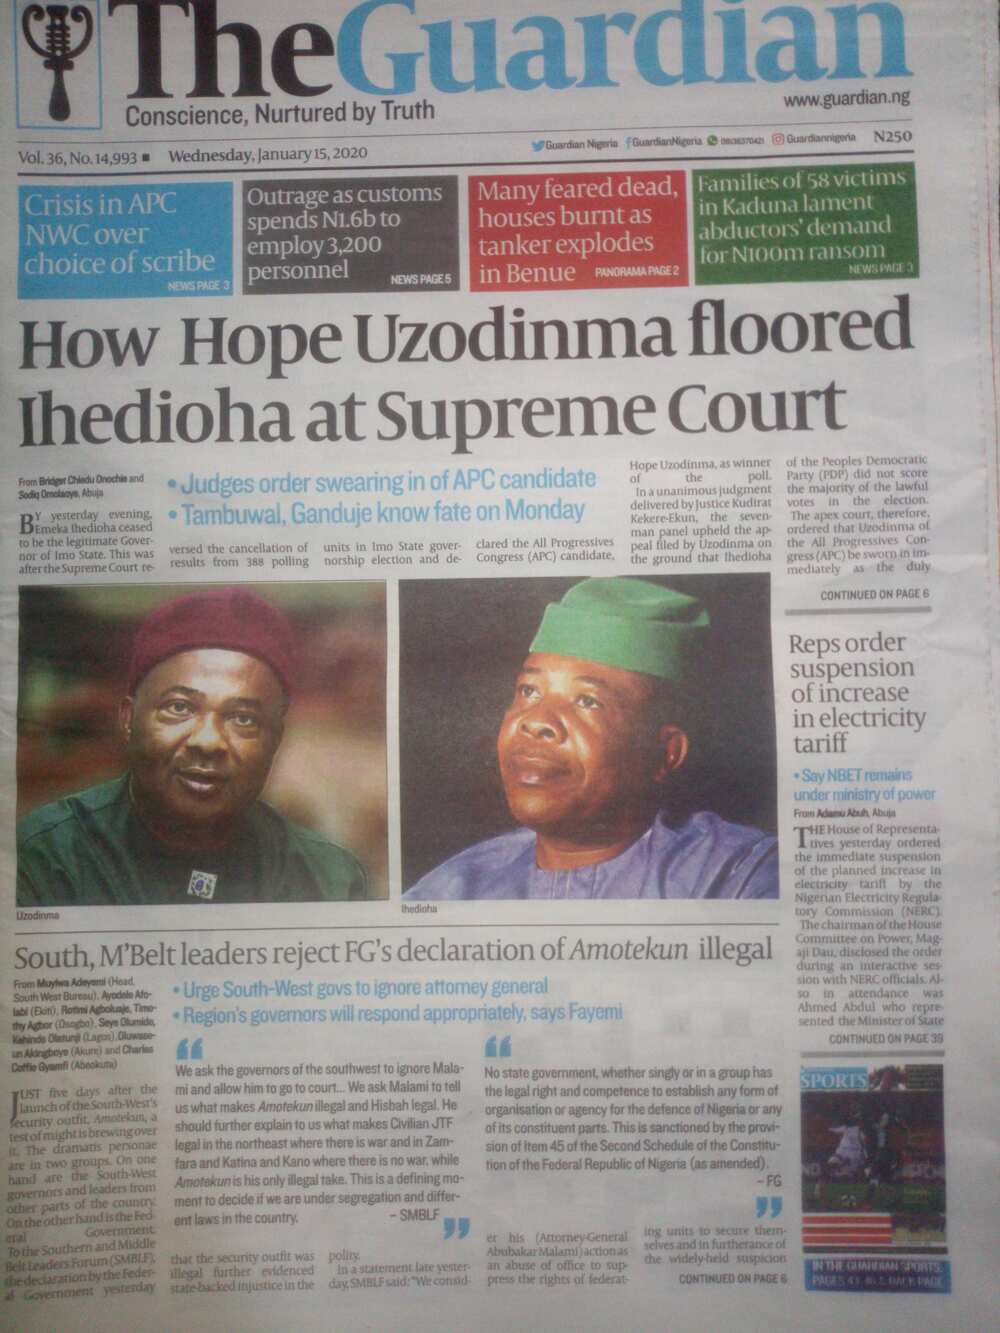 The Guardian newspaper review of January 15